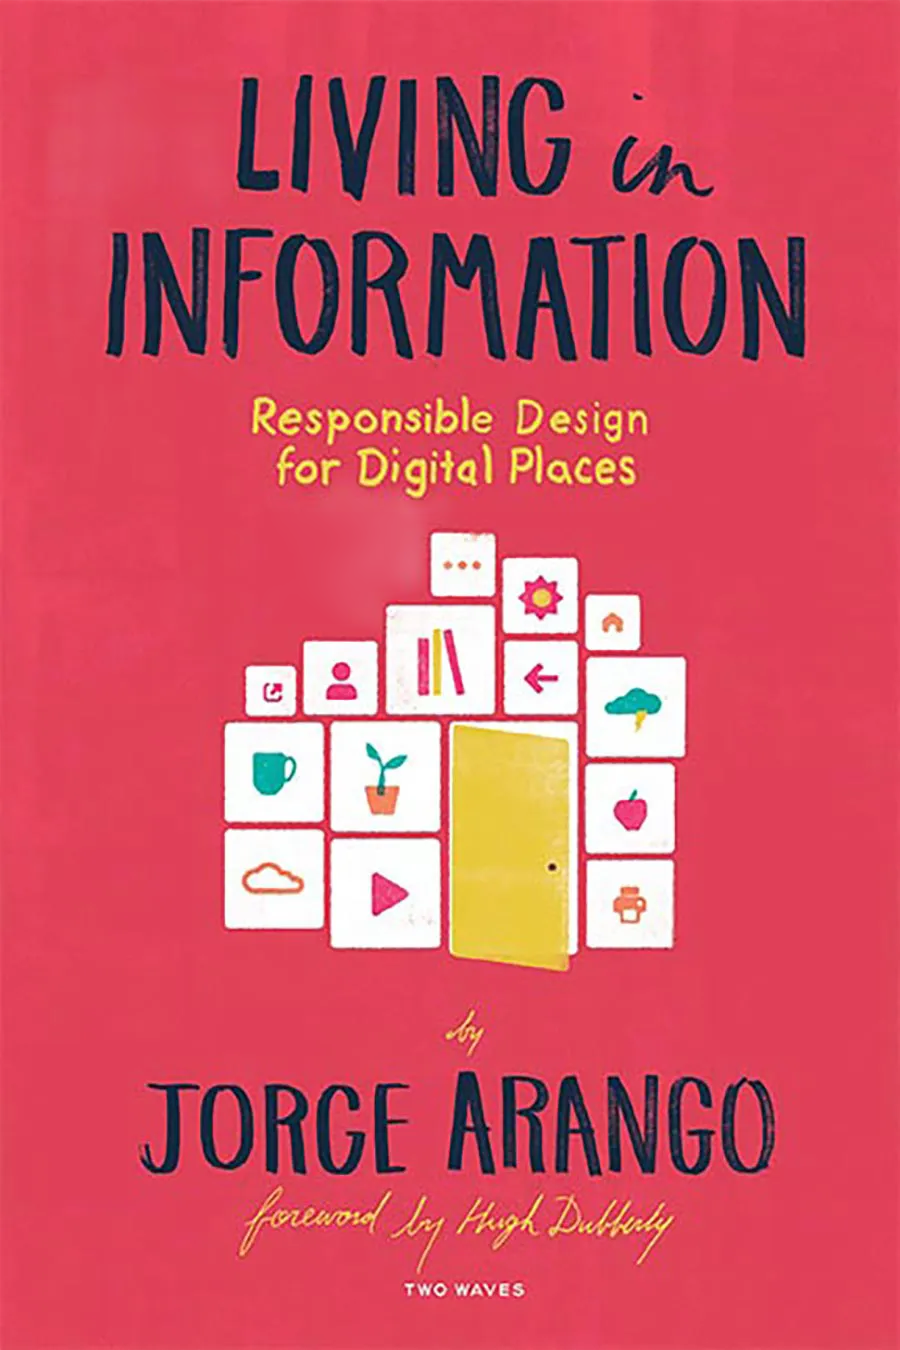 Living in Information book cover